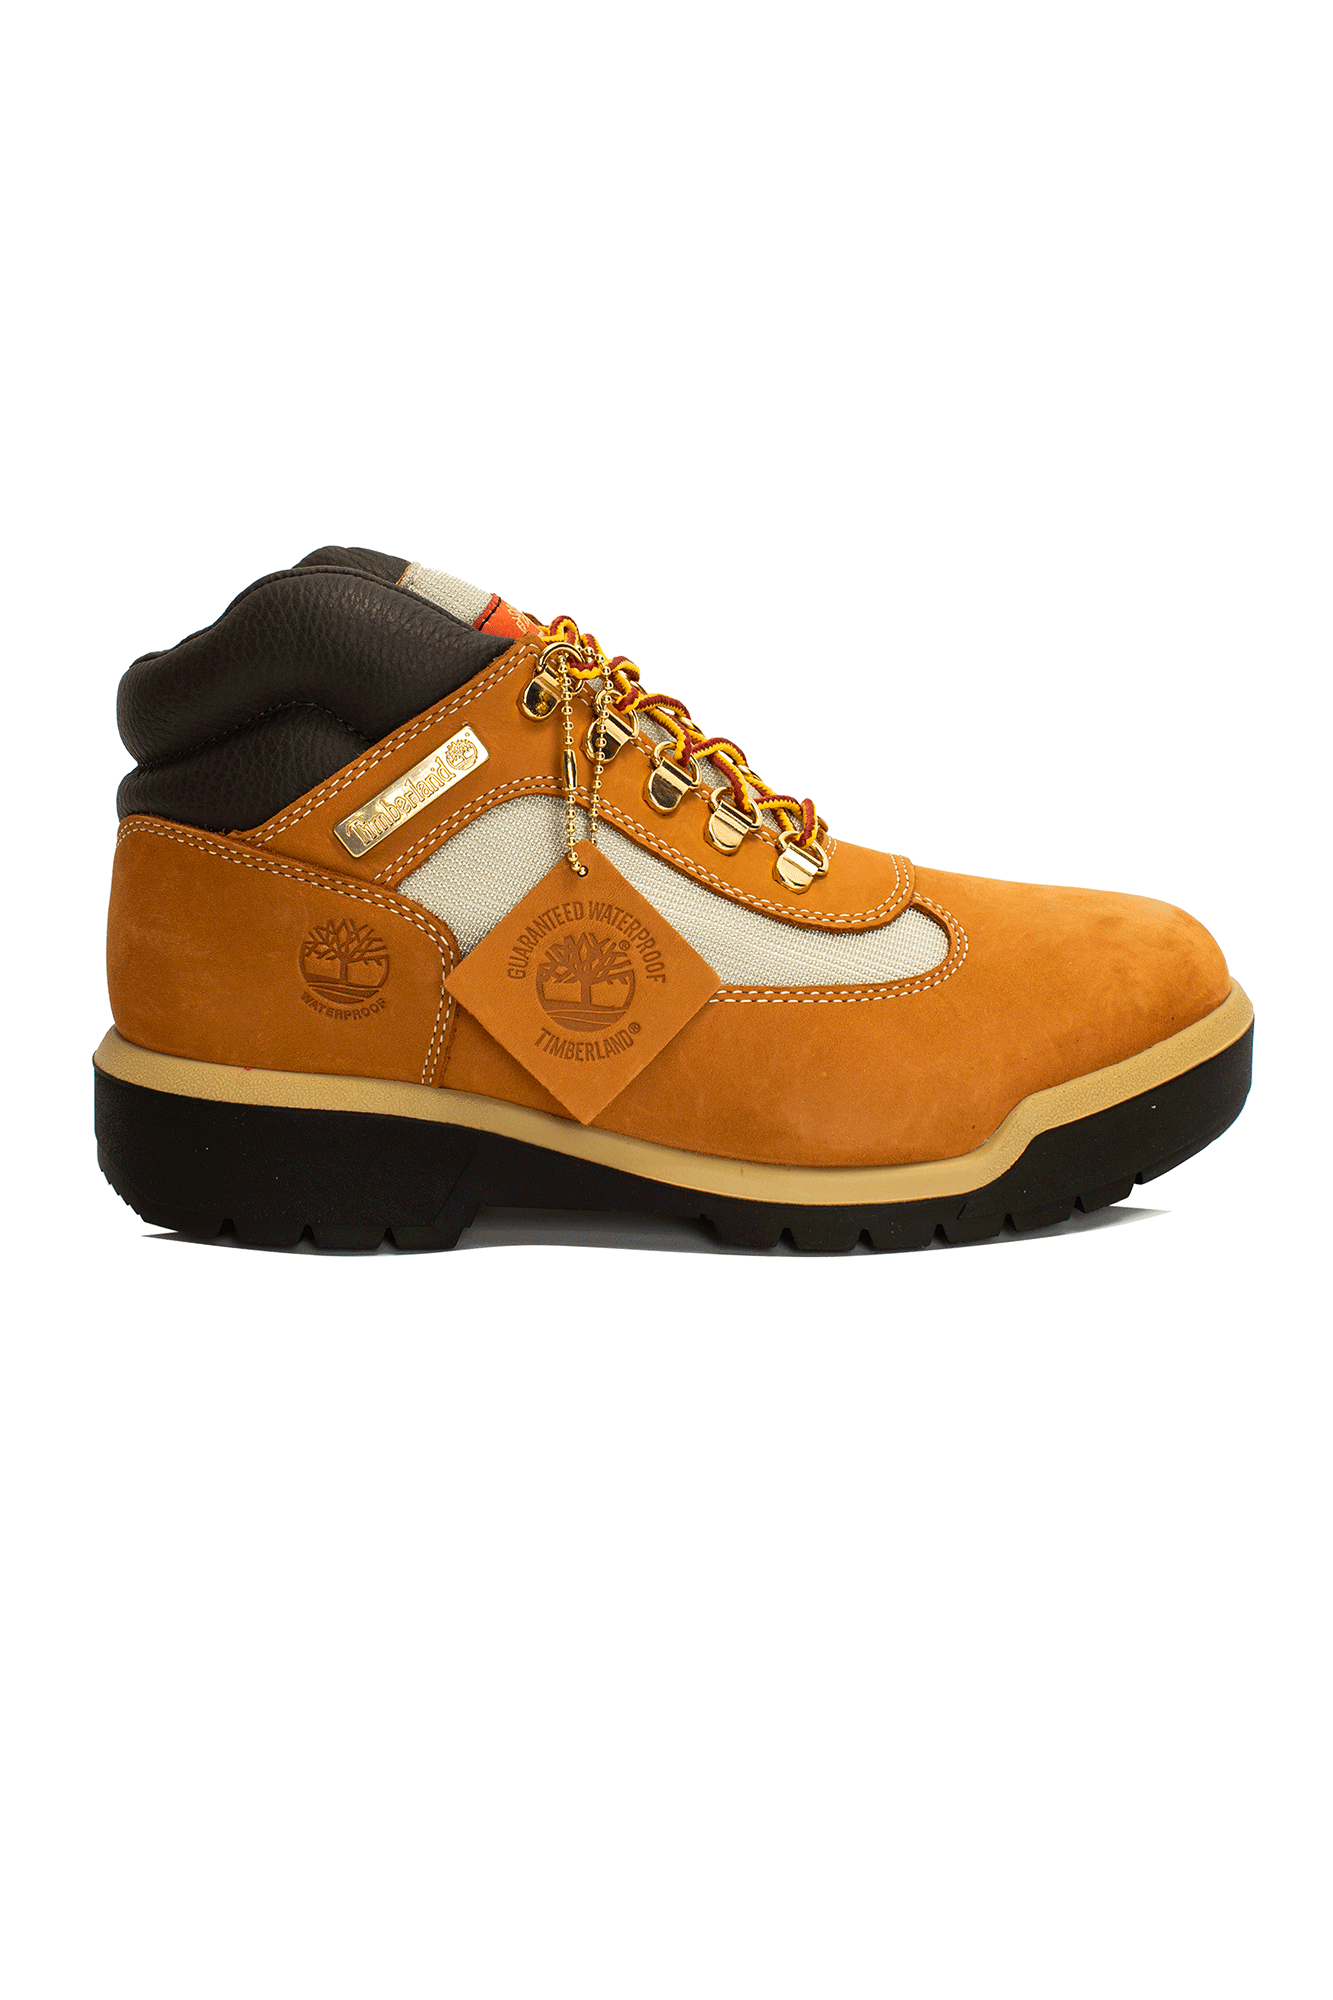 Field Boot Mid Lace Up Waterproof Boot